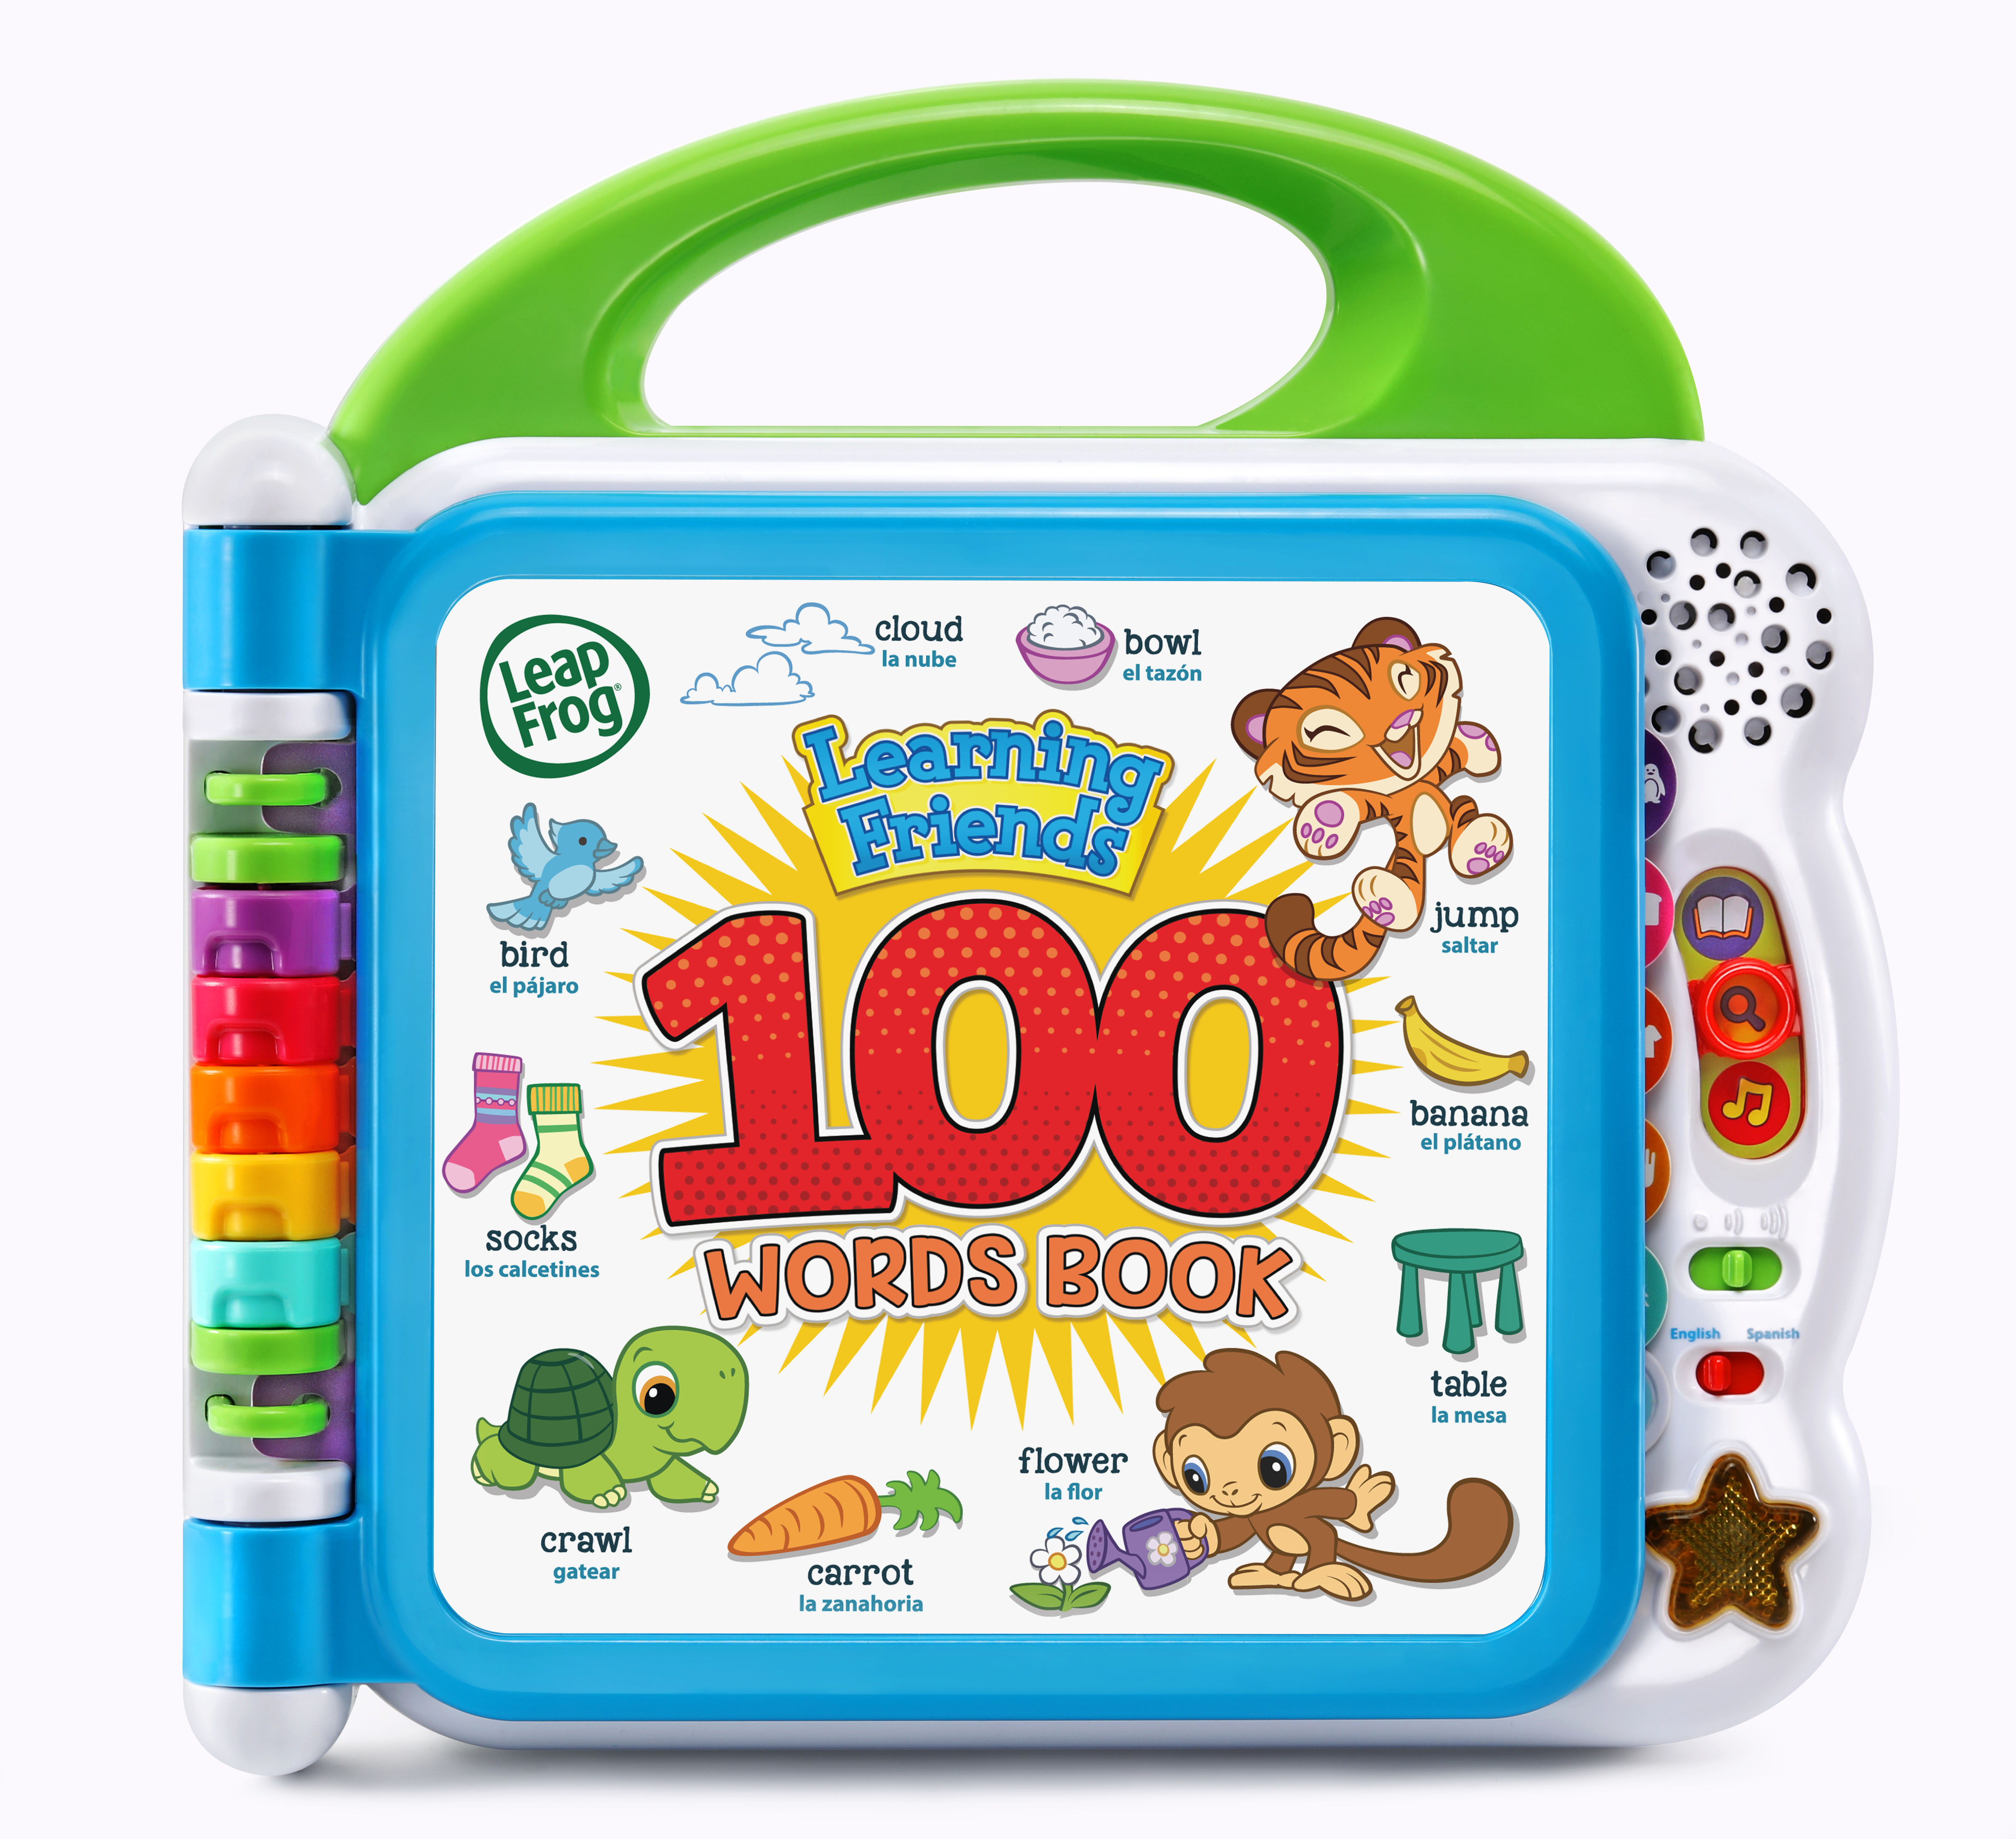 Leapfrog Learning Friends 100 Words Bilingual Electronic Book for Toddlers, Teaches Words, Spanish - image 4 of 11